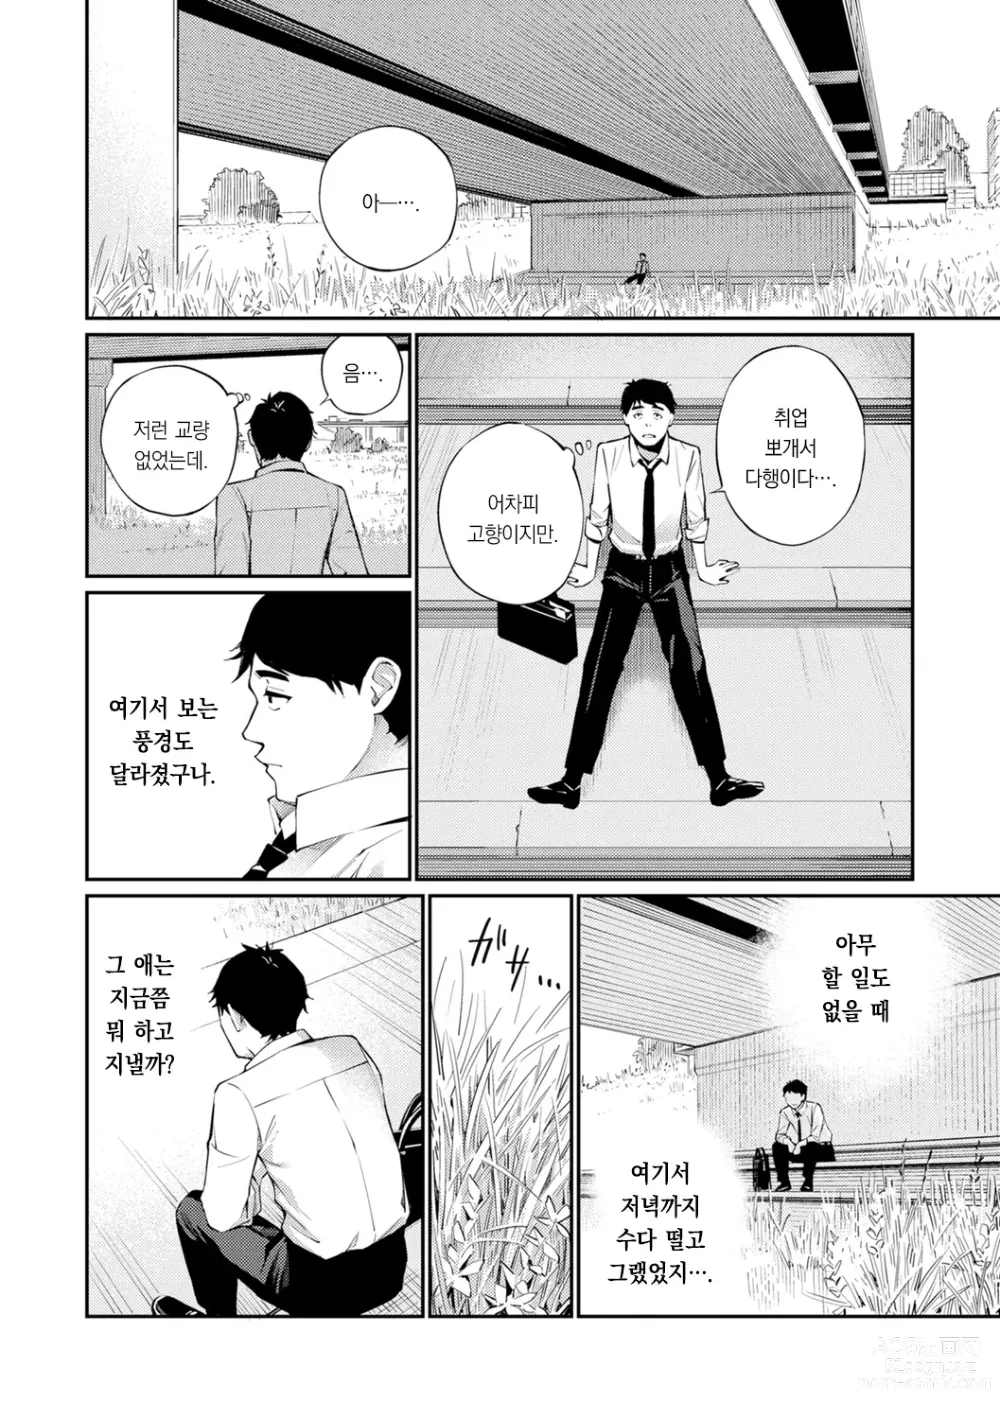 Page 6 of manga 비밀이에요. - Between You&ME